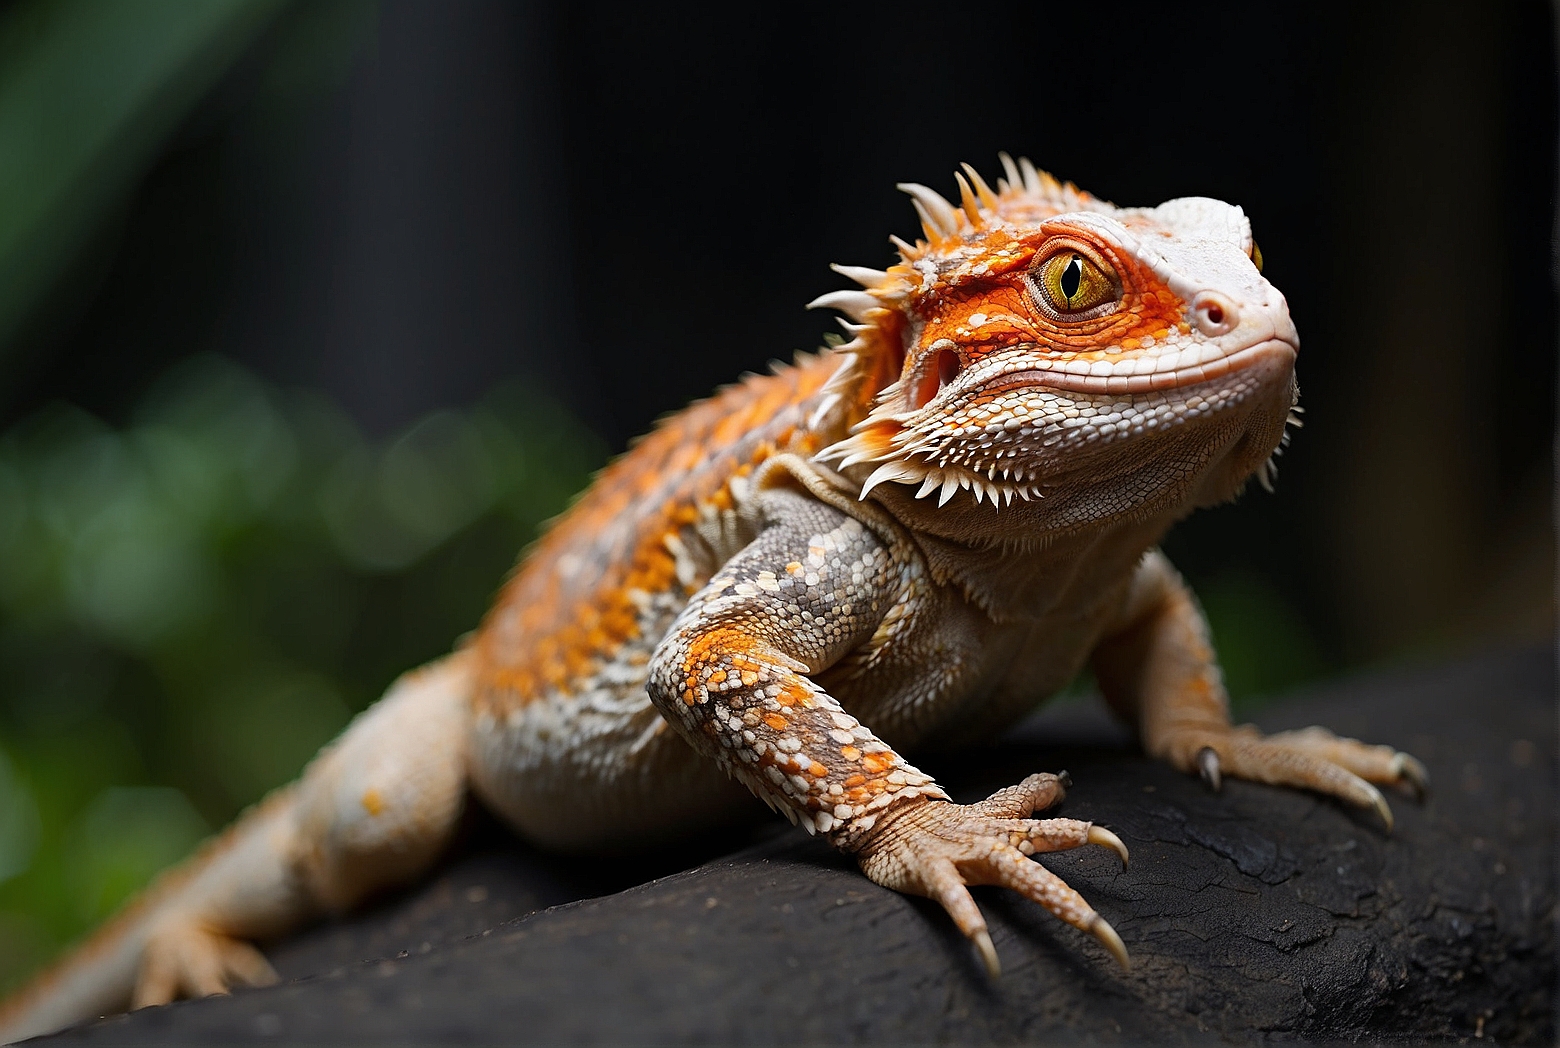 Can Bearded Dragons Cause Health Problems In Humans?